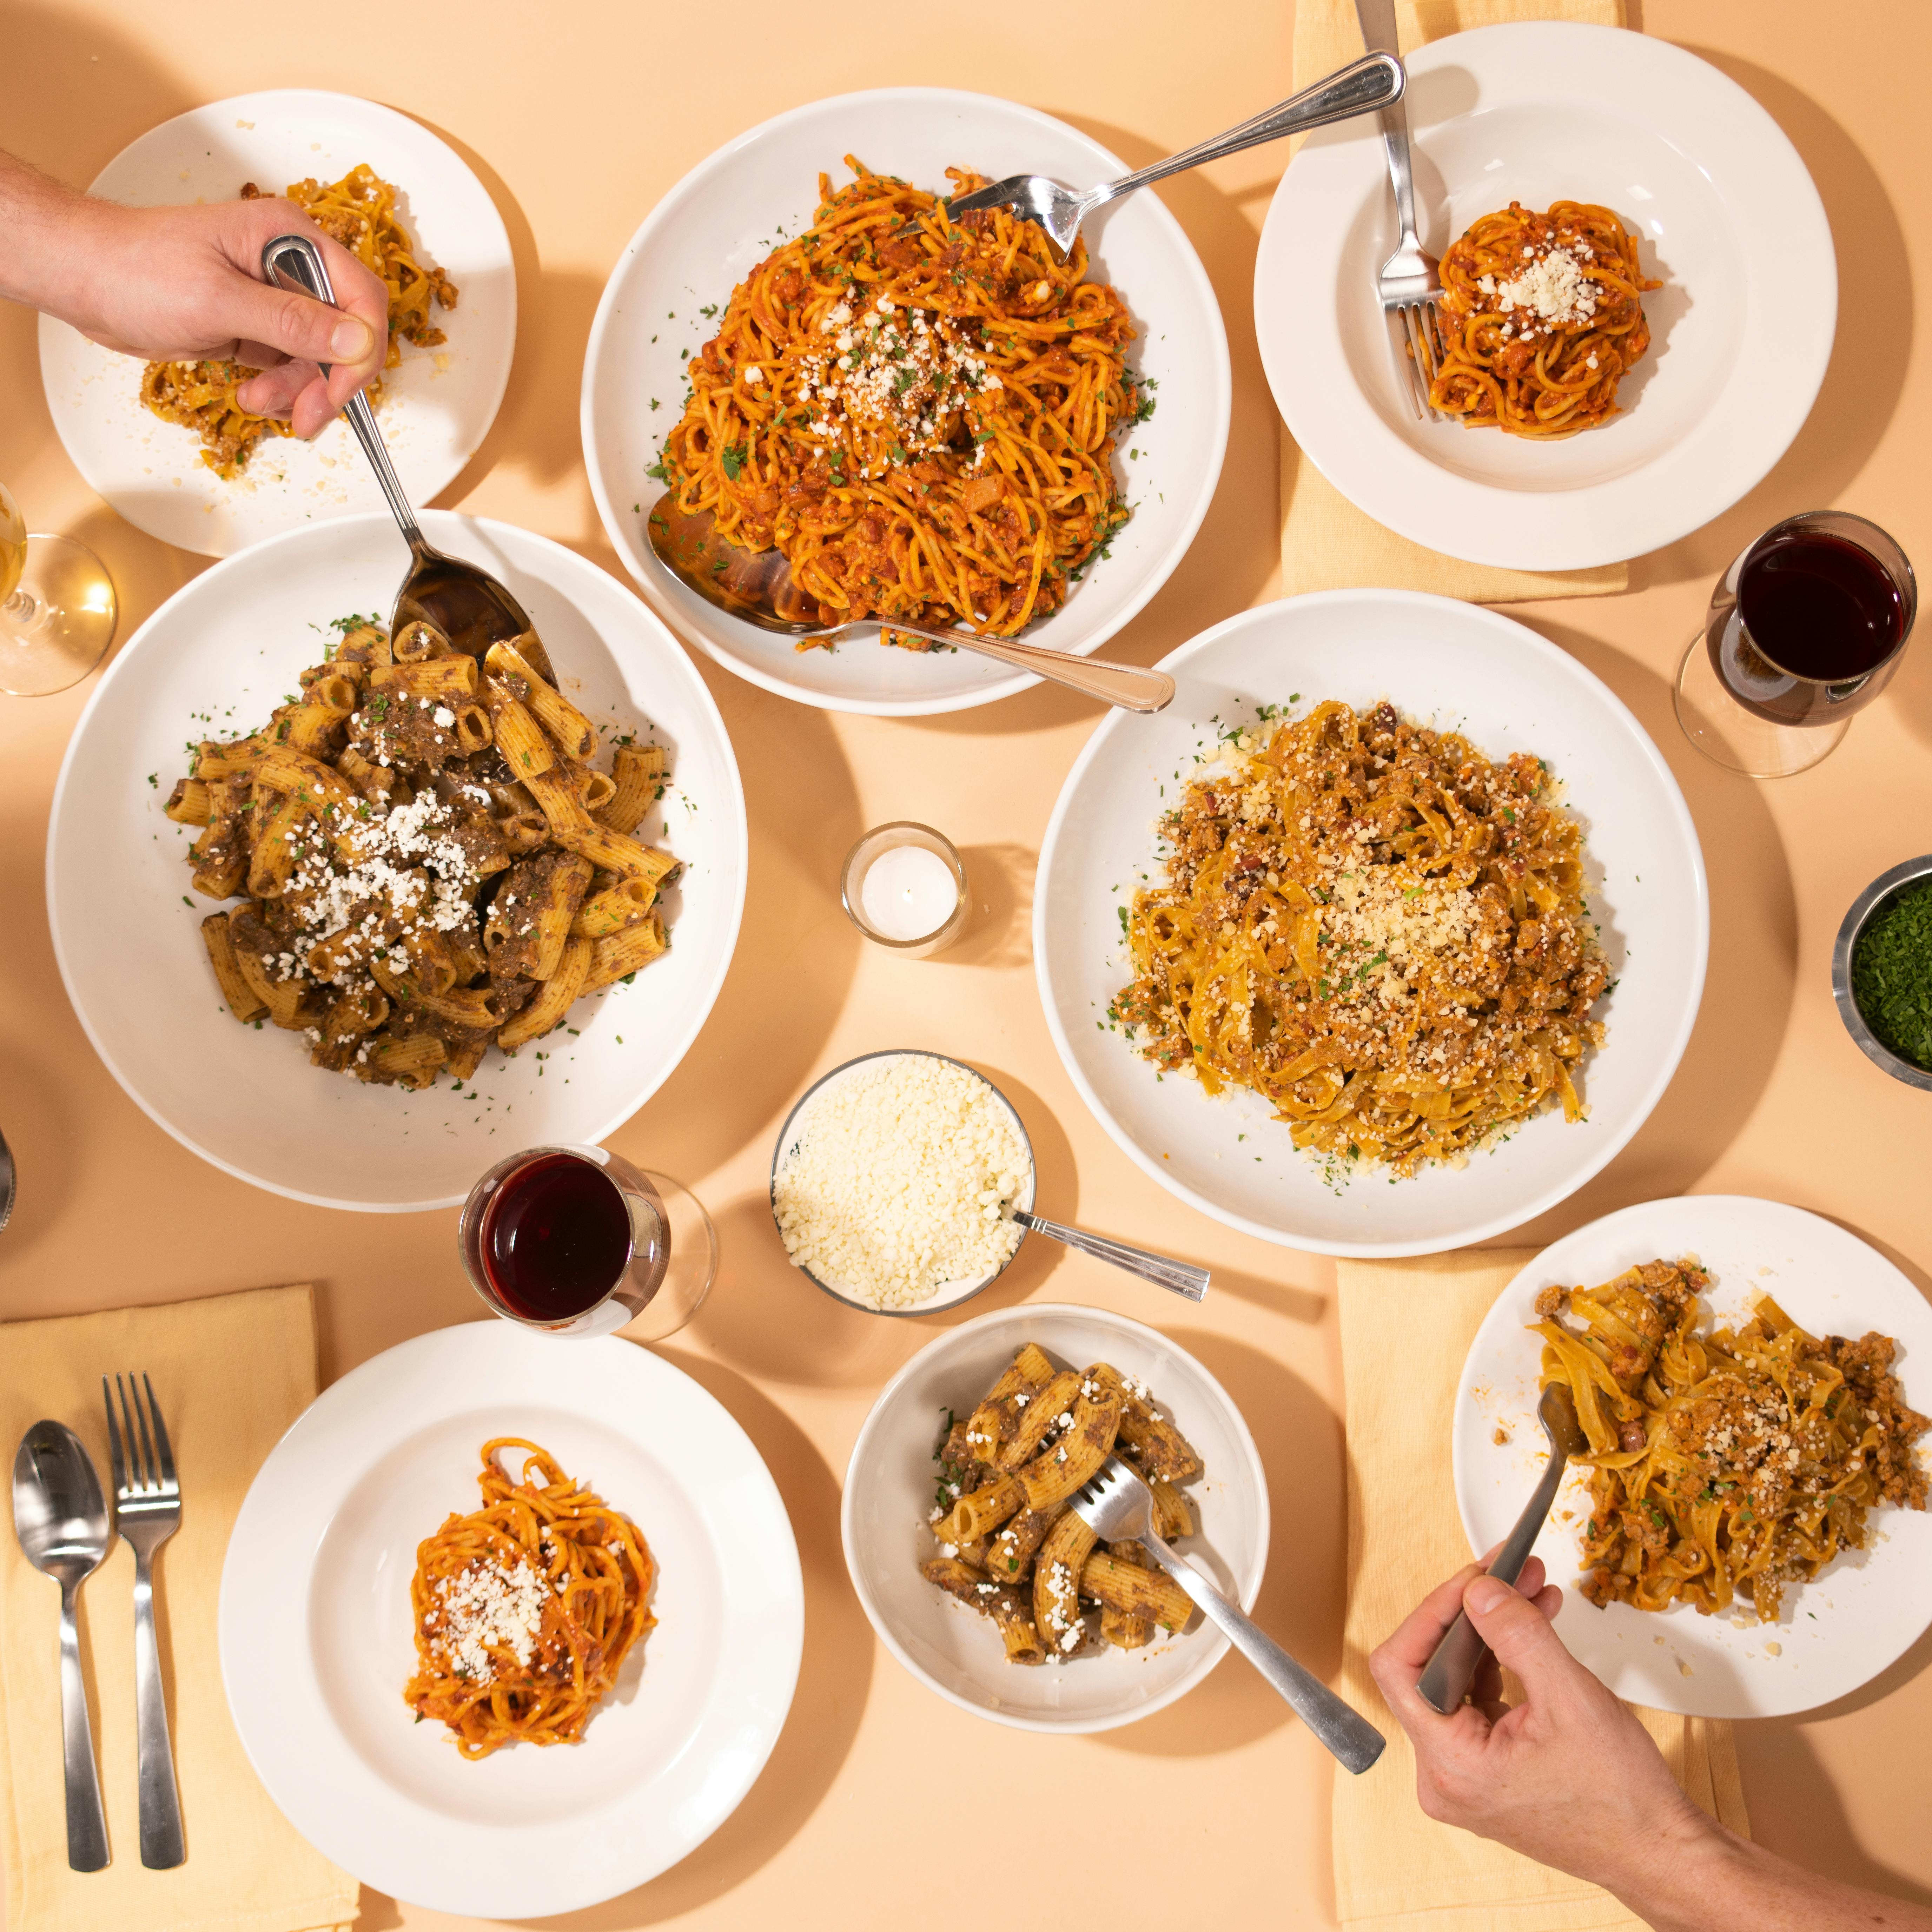 Nuovo Pasta and Fresh Midwest Team Up to Offer Delicious Meal Kits Straight  to Your Door!